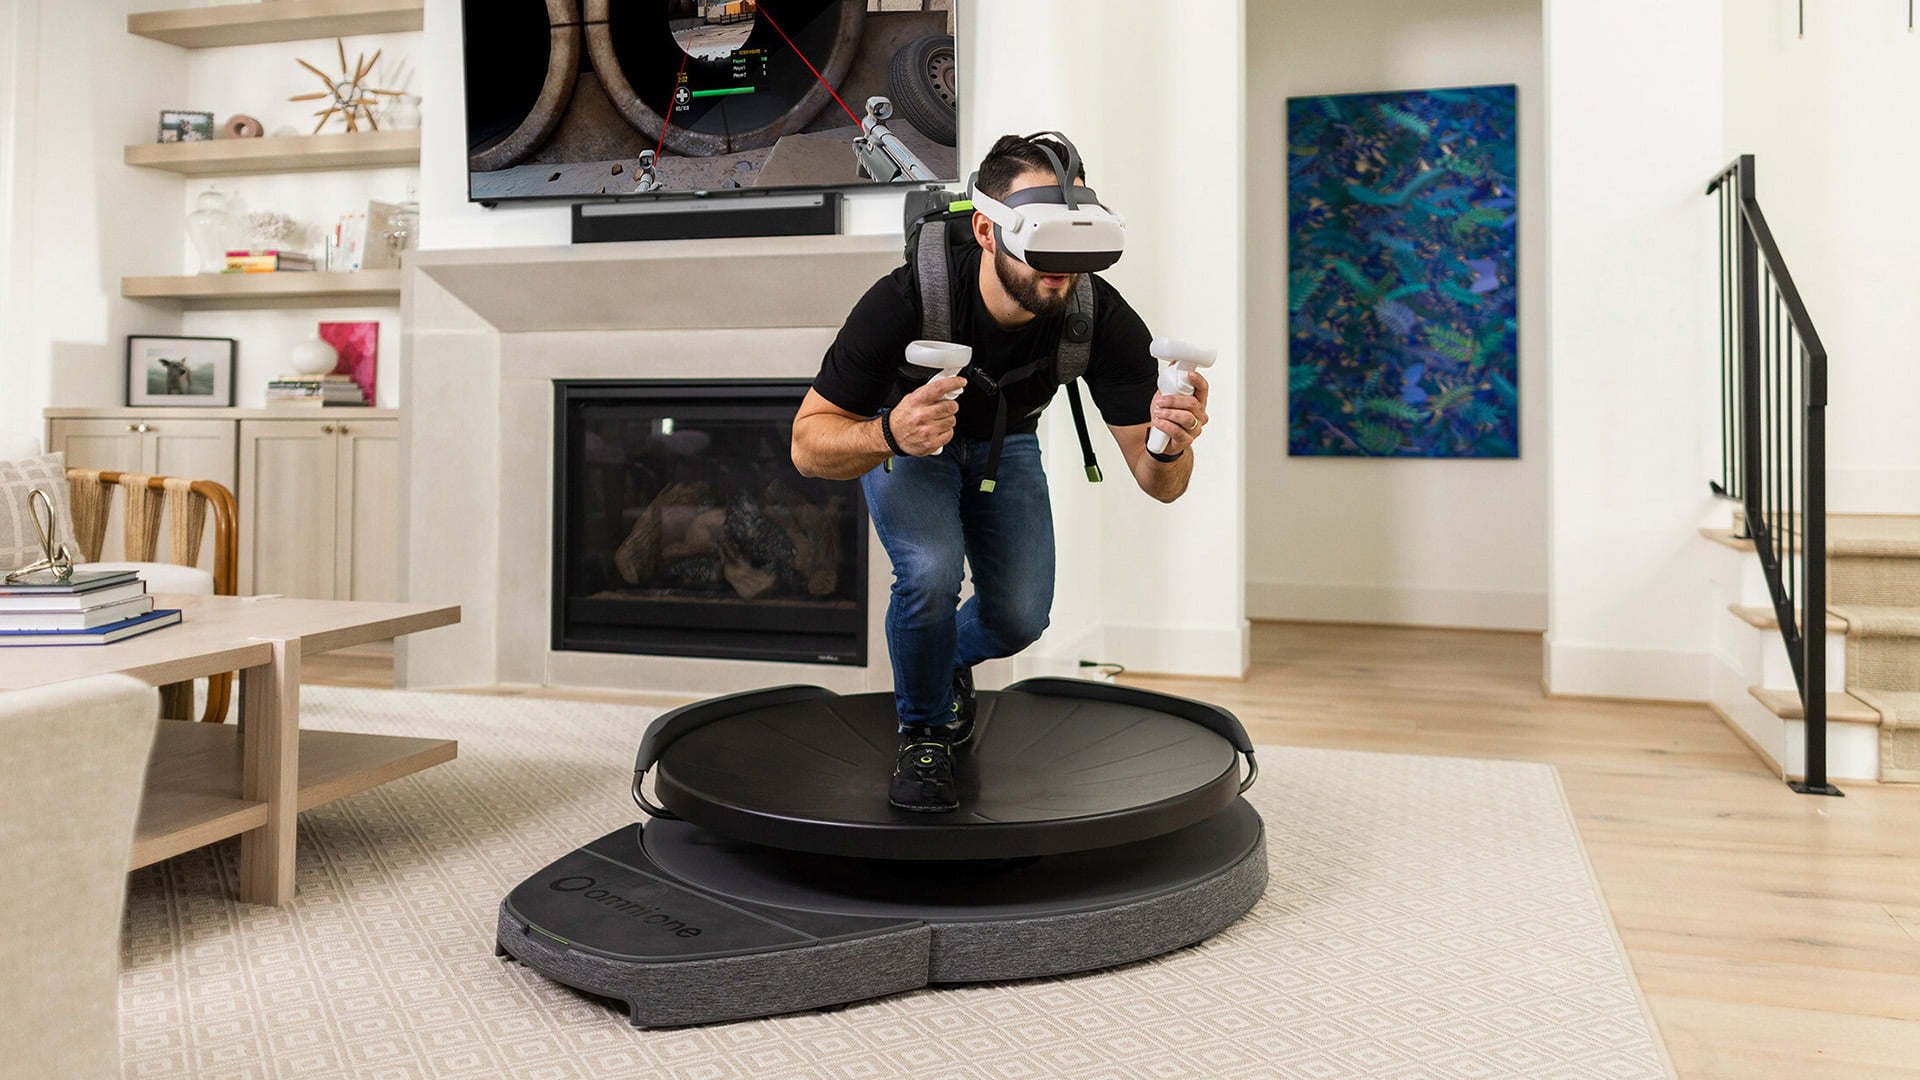 VR treadmill "Omni One" will launch for consumers this year - but is quite expensive